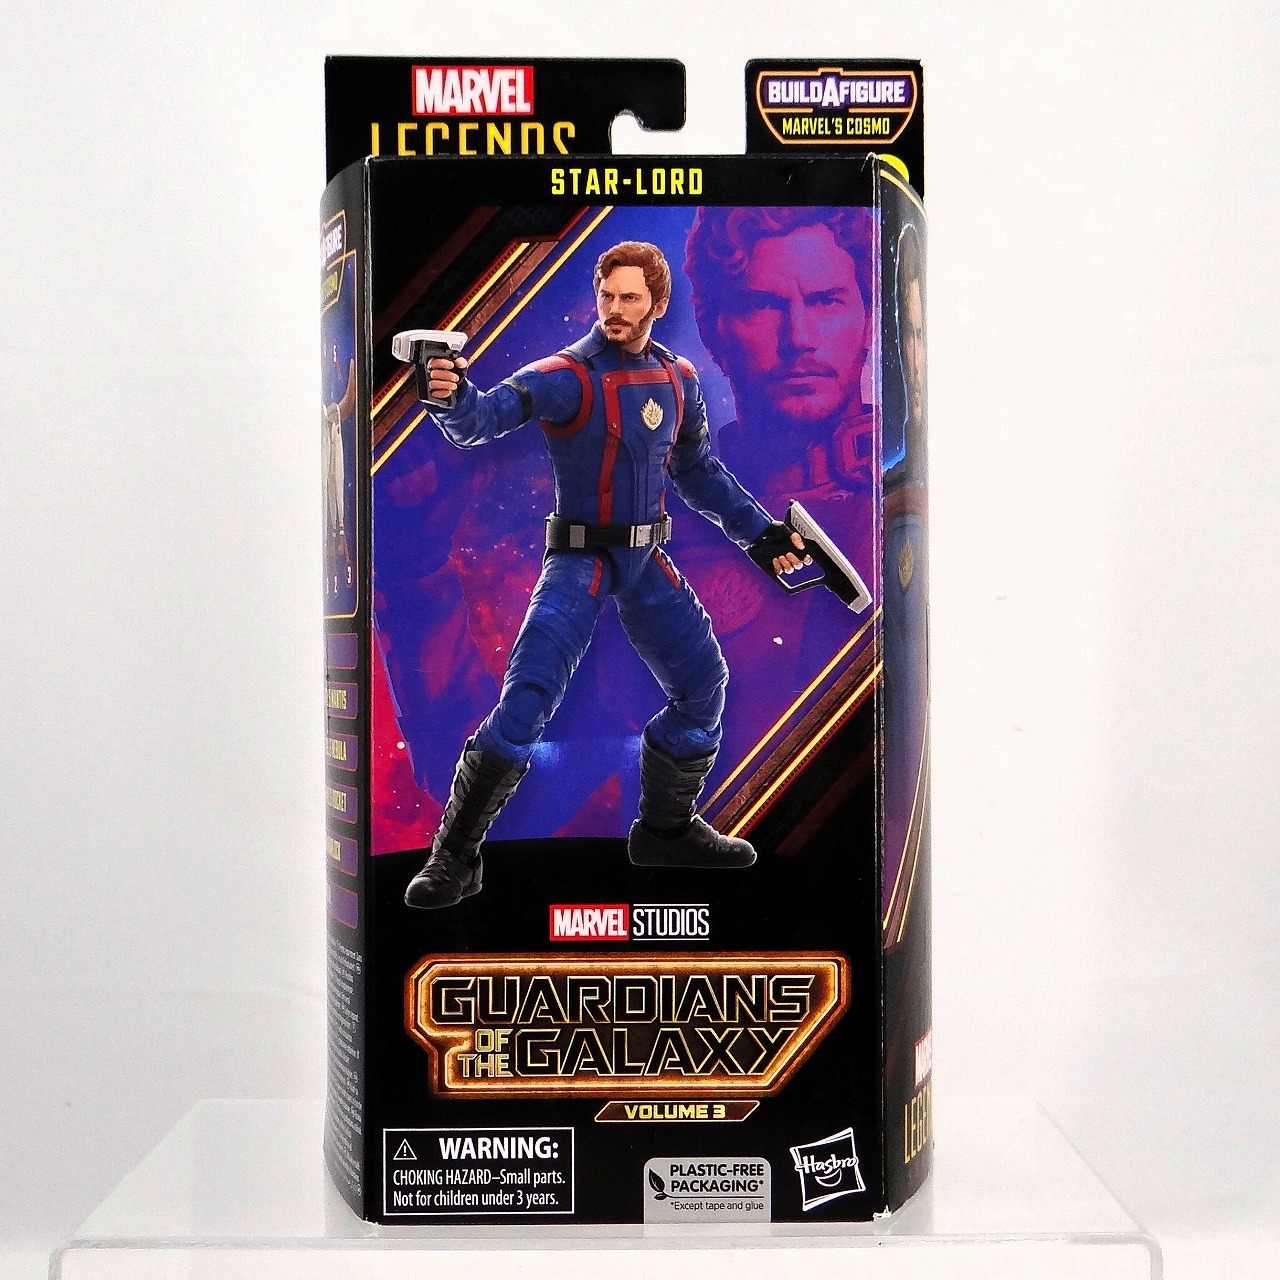 Hasbro Marvel Legends Series Marvel's Cosmo Stsr-Lord 6-Inch Action Figures